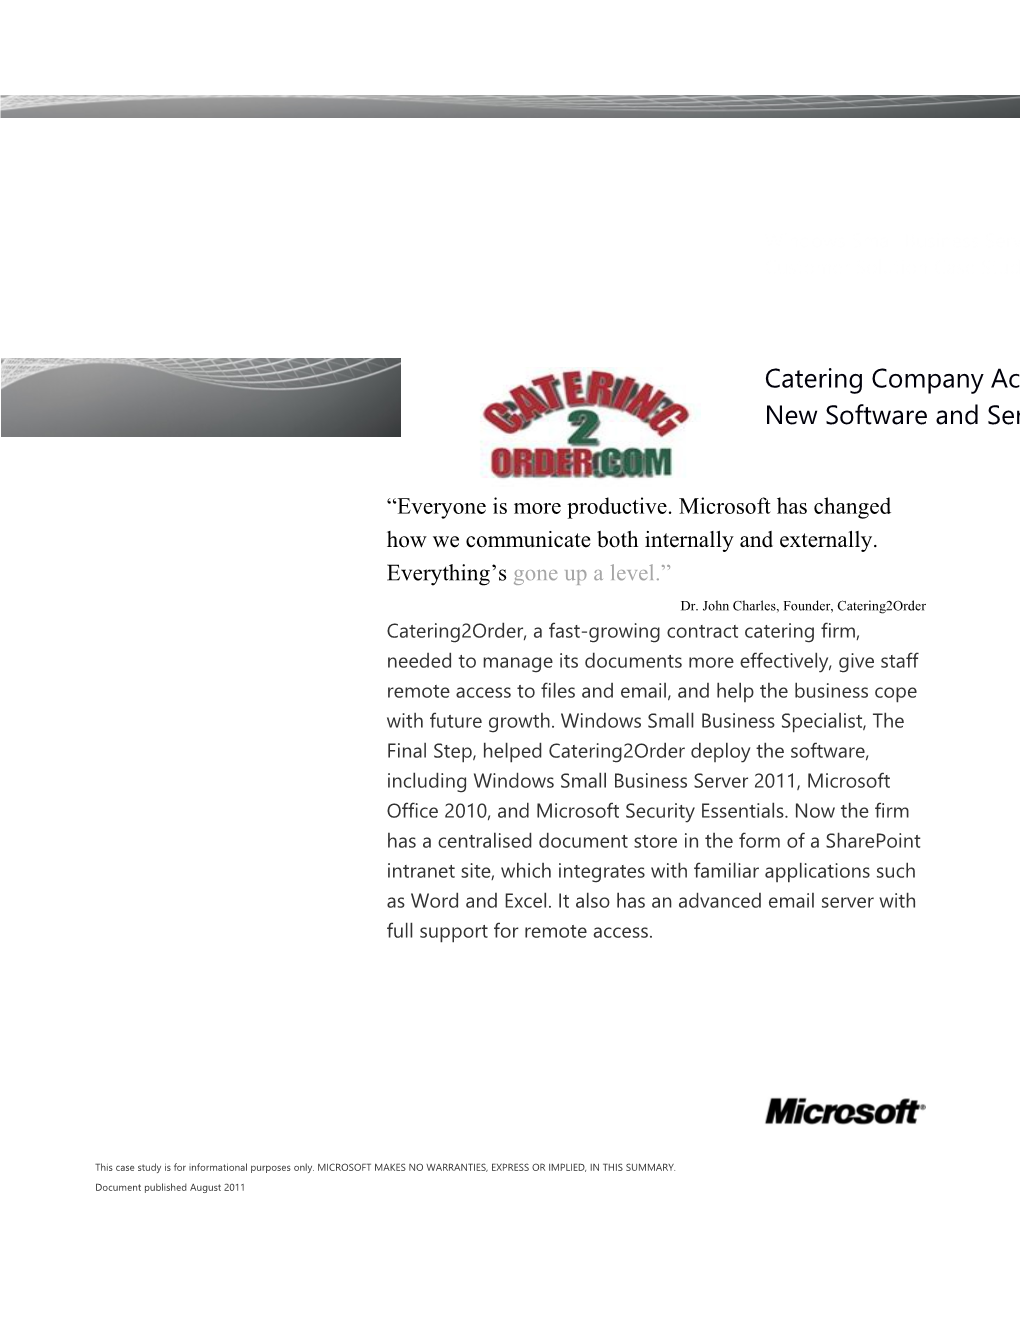 Writeimage CSB Catering Company Accelerates Growth with Microsoft Software